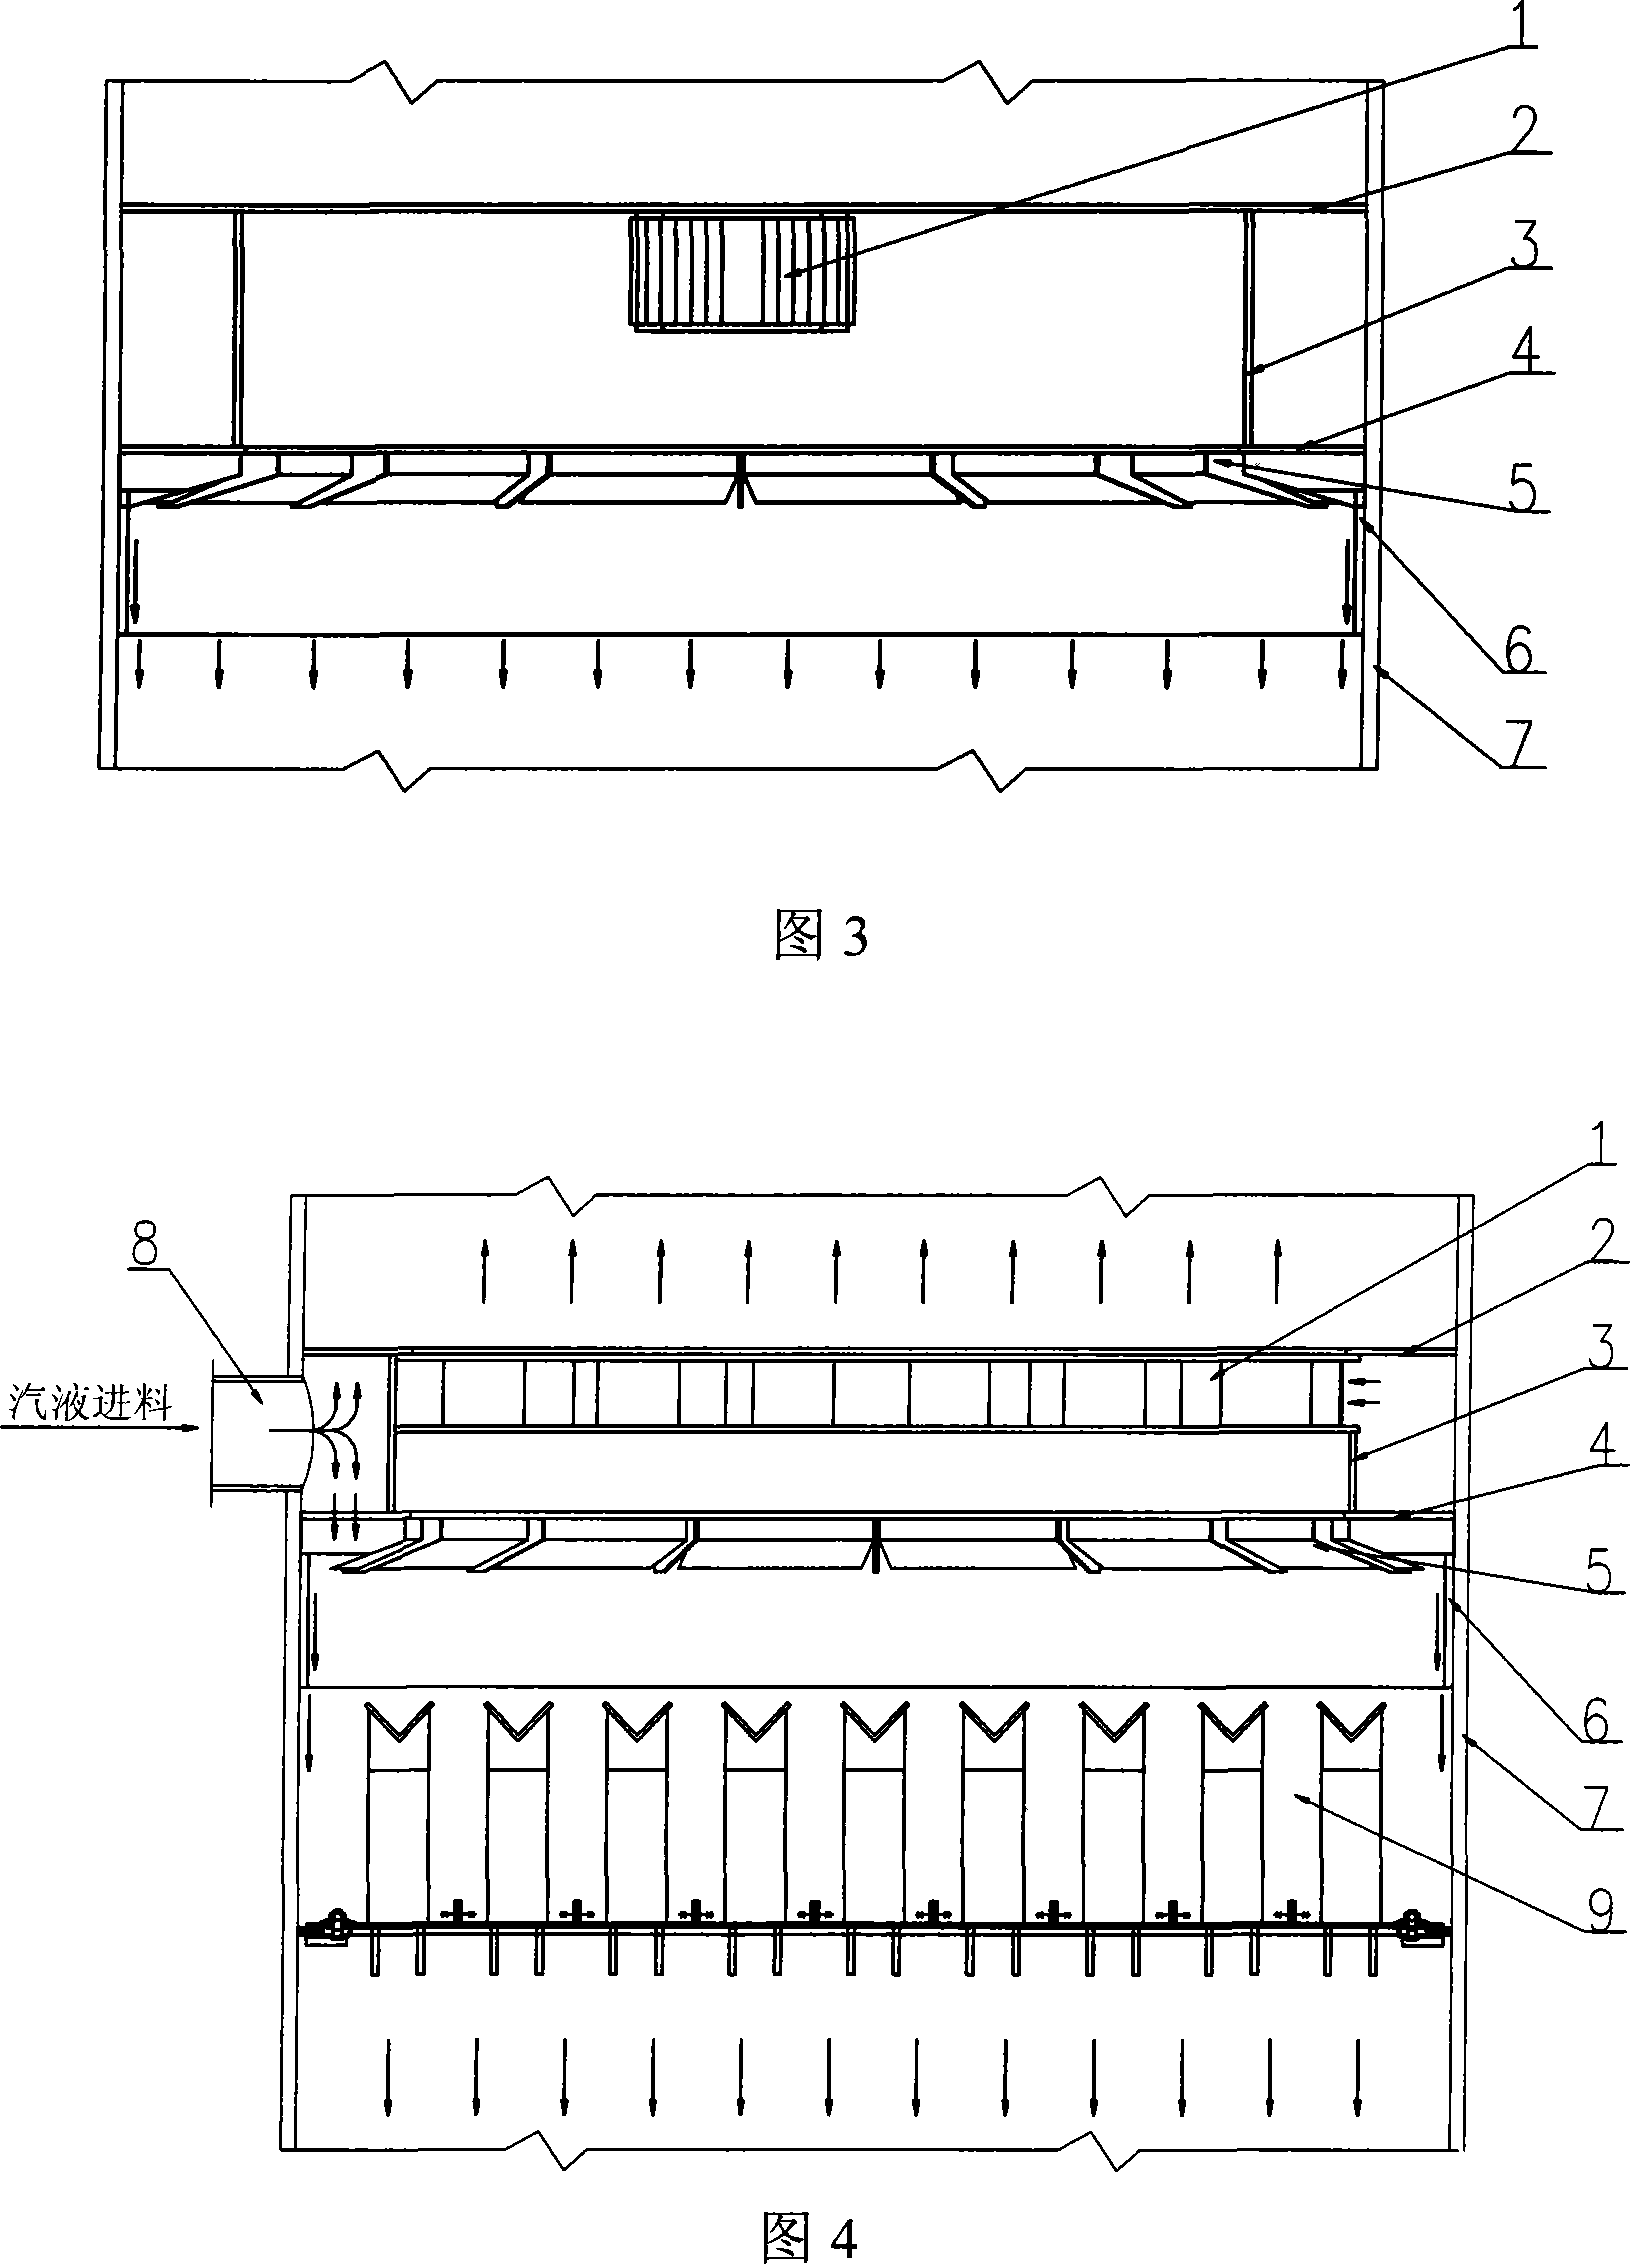 Liquid preliminary distribution device with gas distribution function